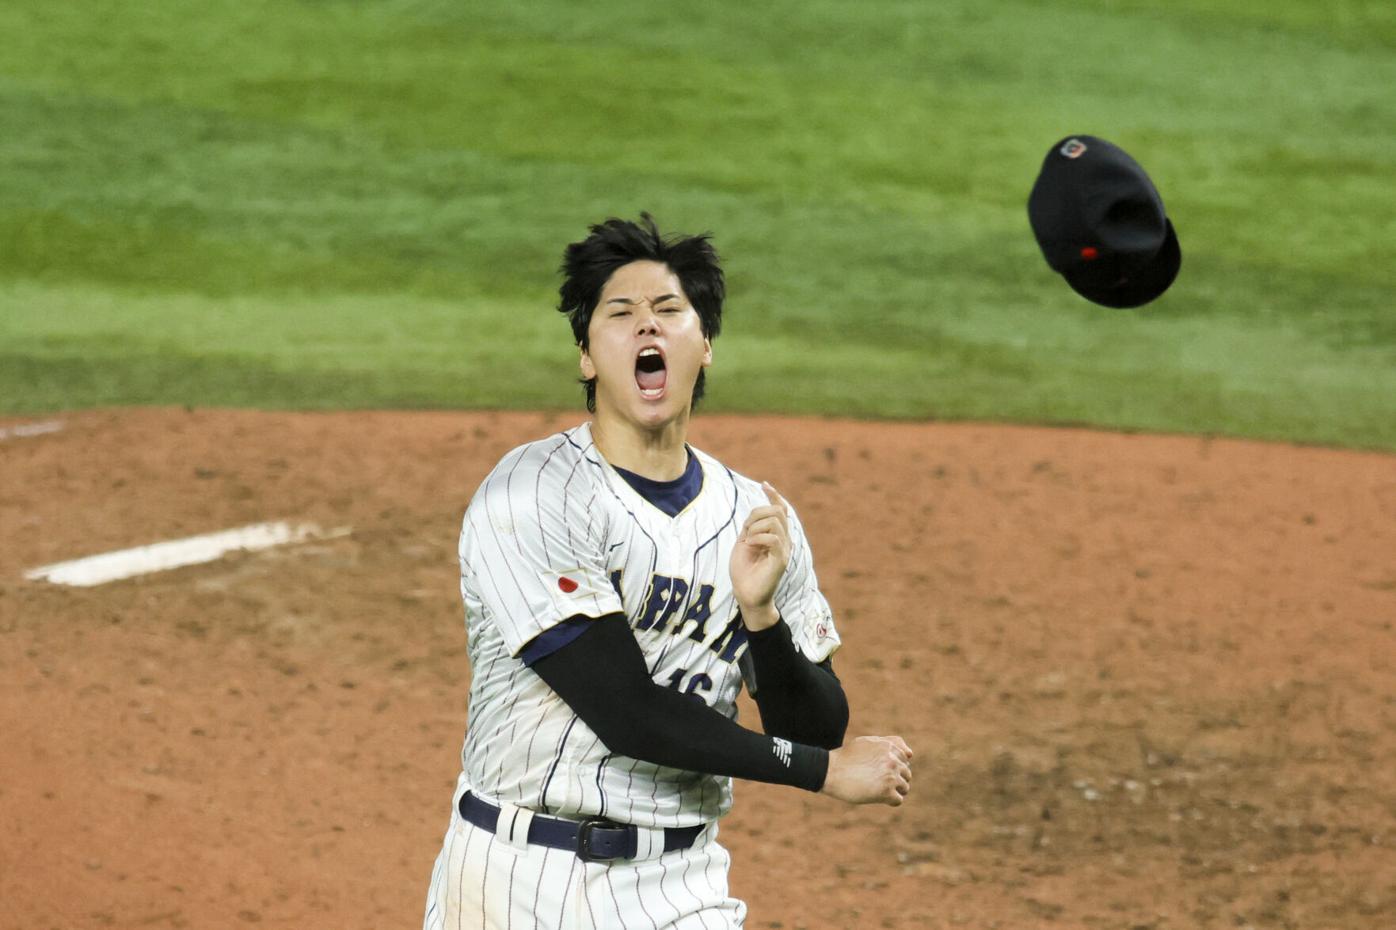 Shohei with his country Japan on his shoulder : r/baseball